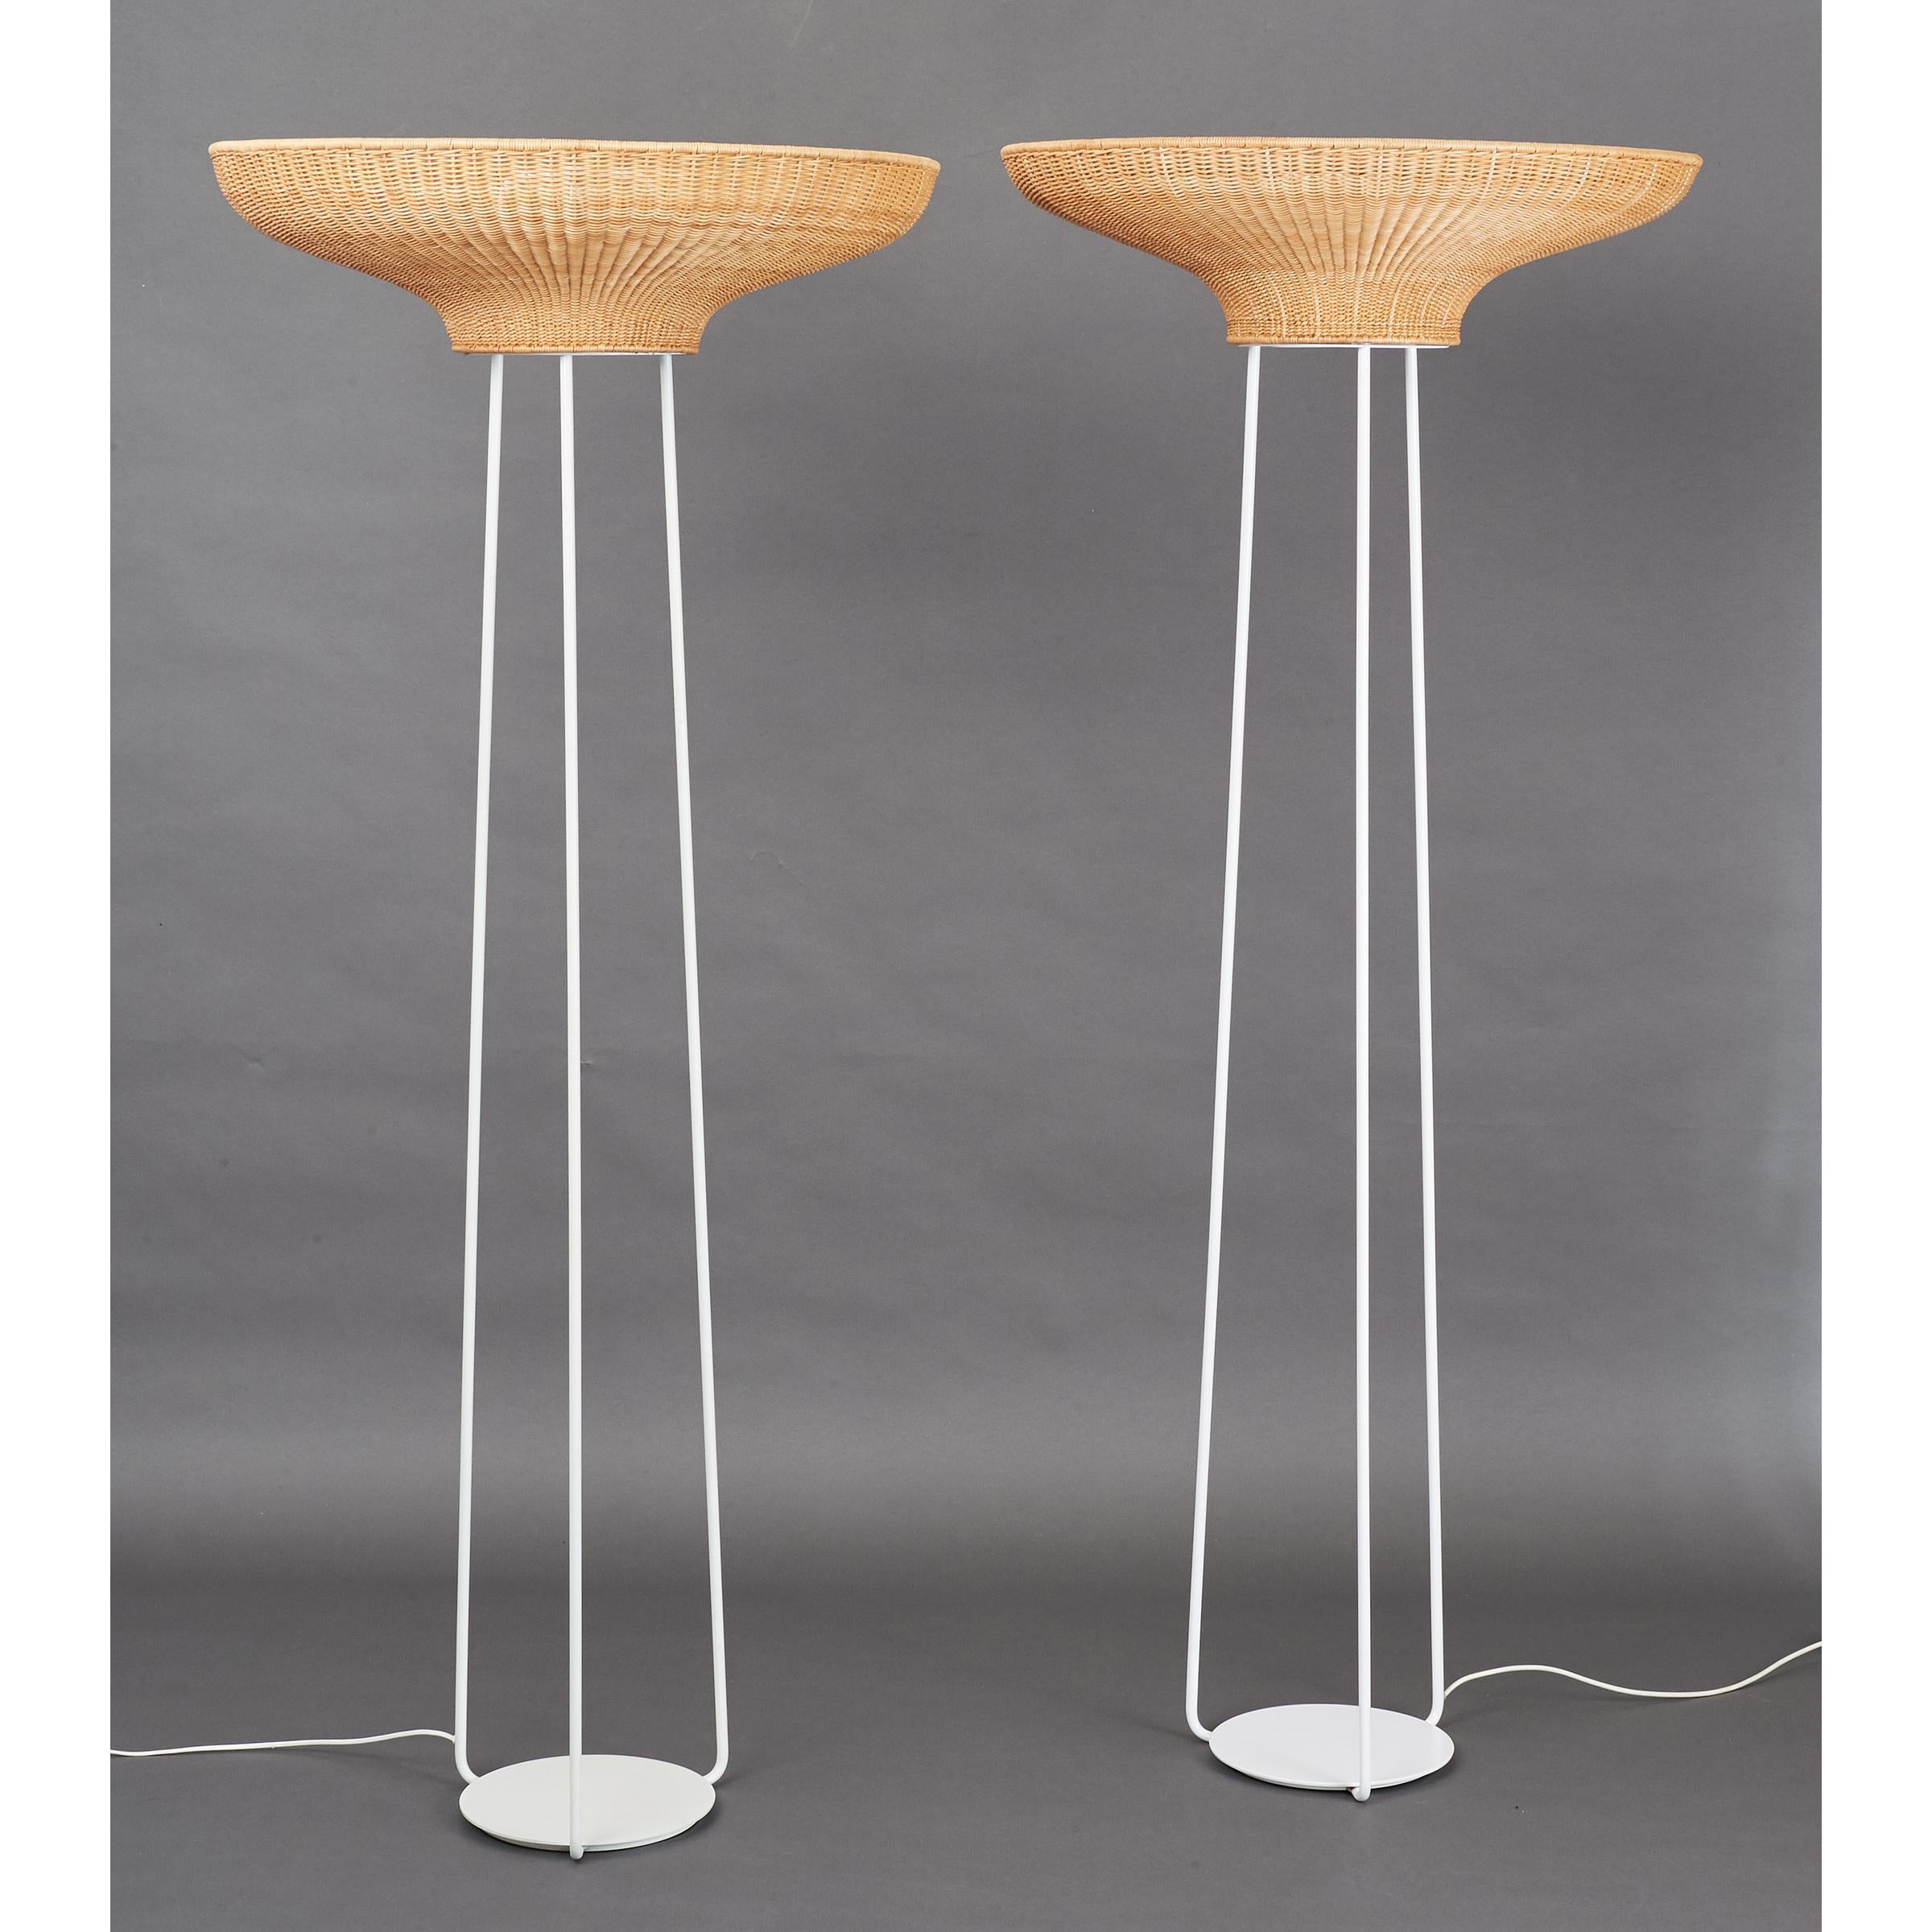 France, late 20th century
A stunning pair of floor lamps in enameled metal and tightly woven rattan.
An elegant and modern reinterpretation of a classical tripod lamp.
Measures: 30 Ø x 71 H
Rewired for use in the US with one standard base